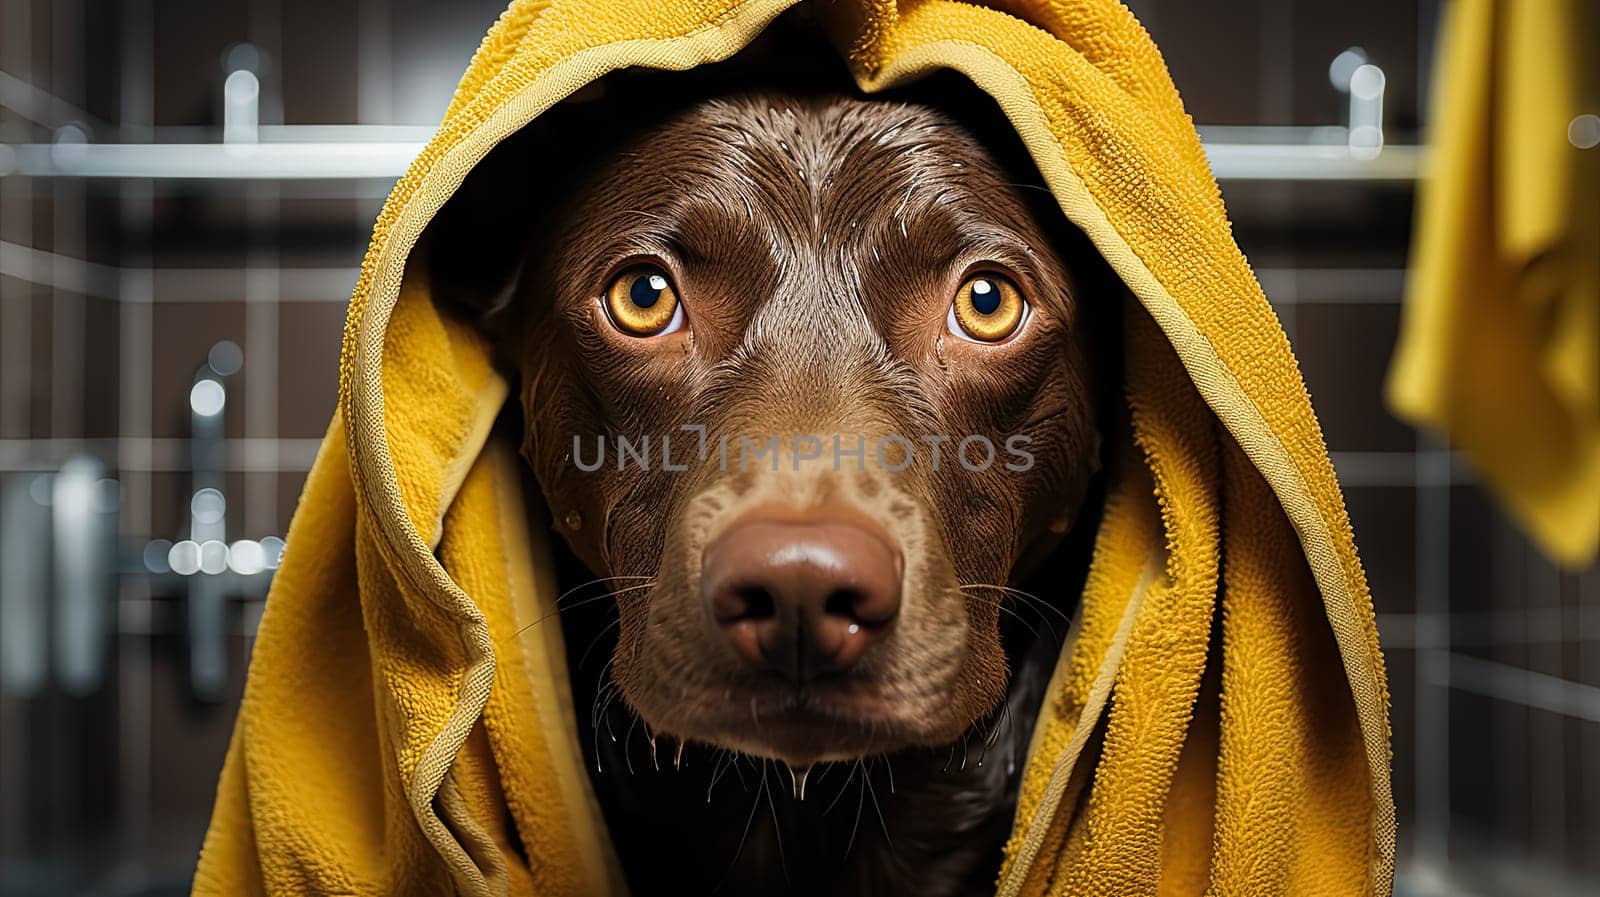 A dachshund, wrapped in a yellow towel post bath, embodies the essence of pet care, ensuring cleanliness and comfort for furry companions.